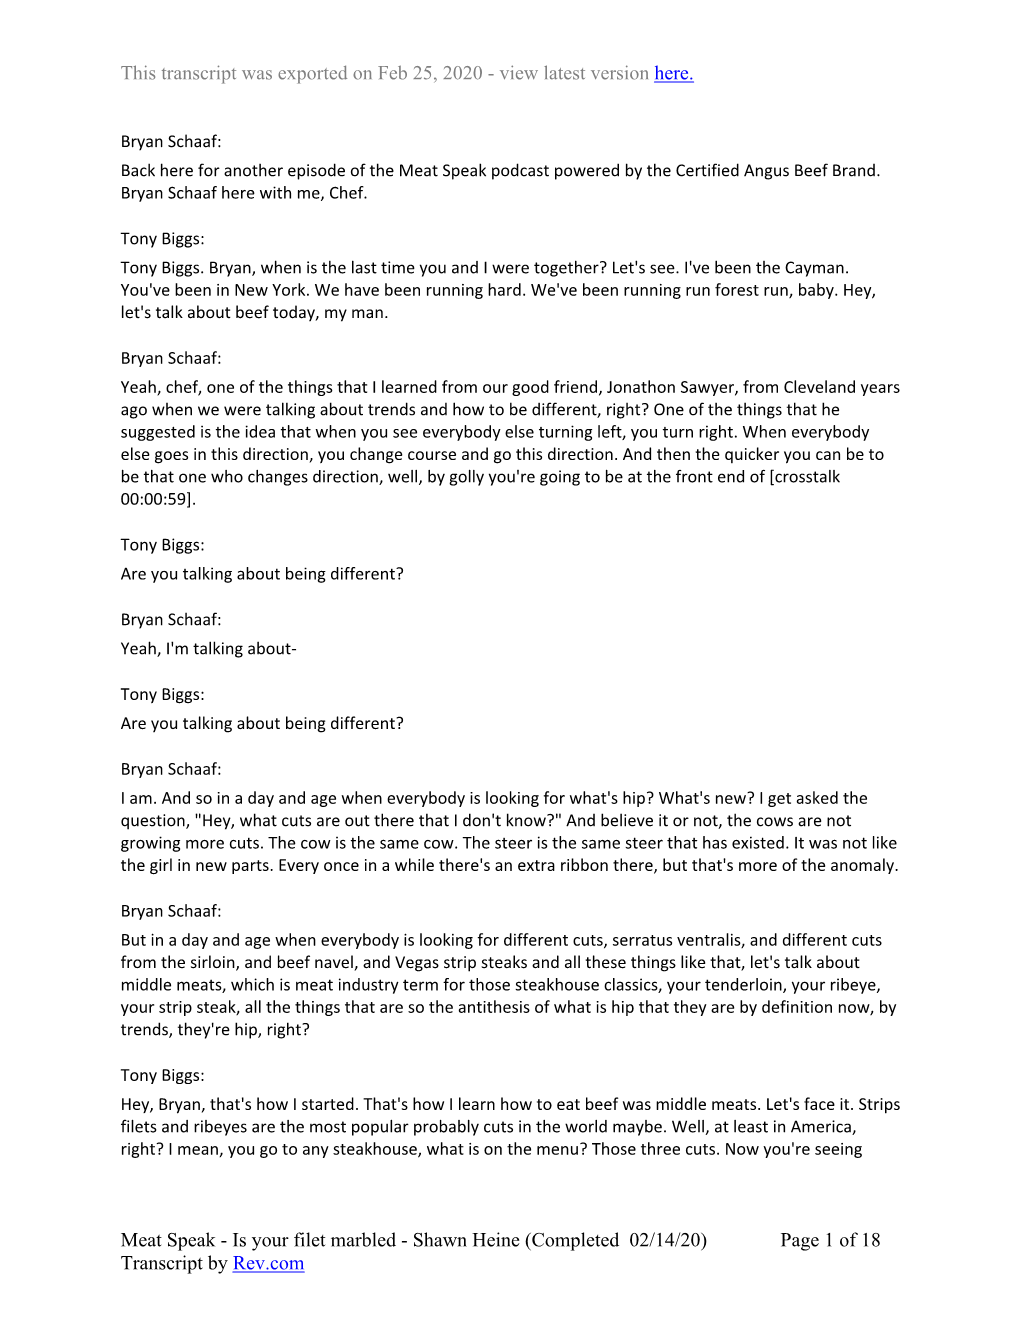 Shawn Heine (Completed 02/14/20) Page 1 of 18 Transcript by Rev.Com This Transcript Was Exported on Feb 25, 2020 - View Latest Version Here